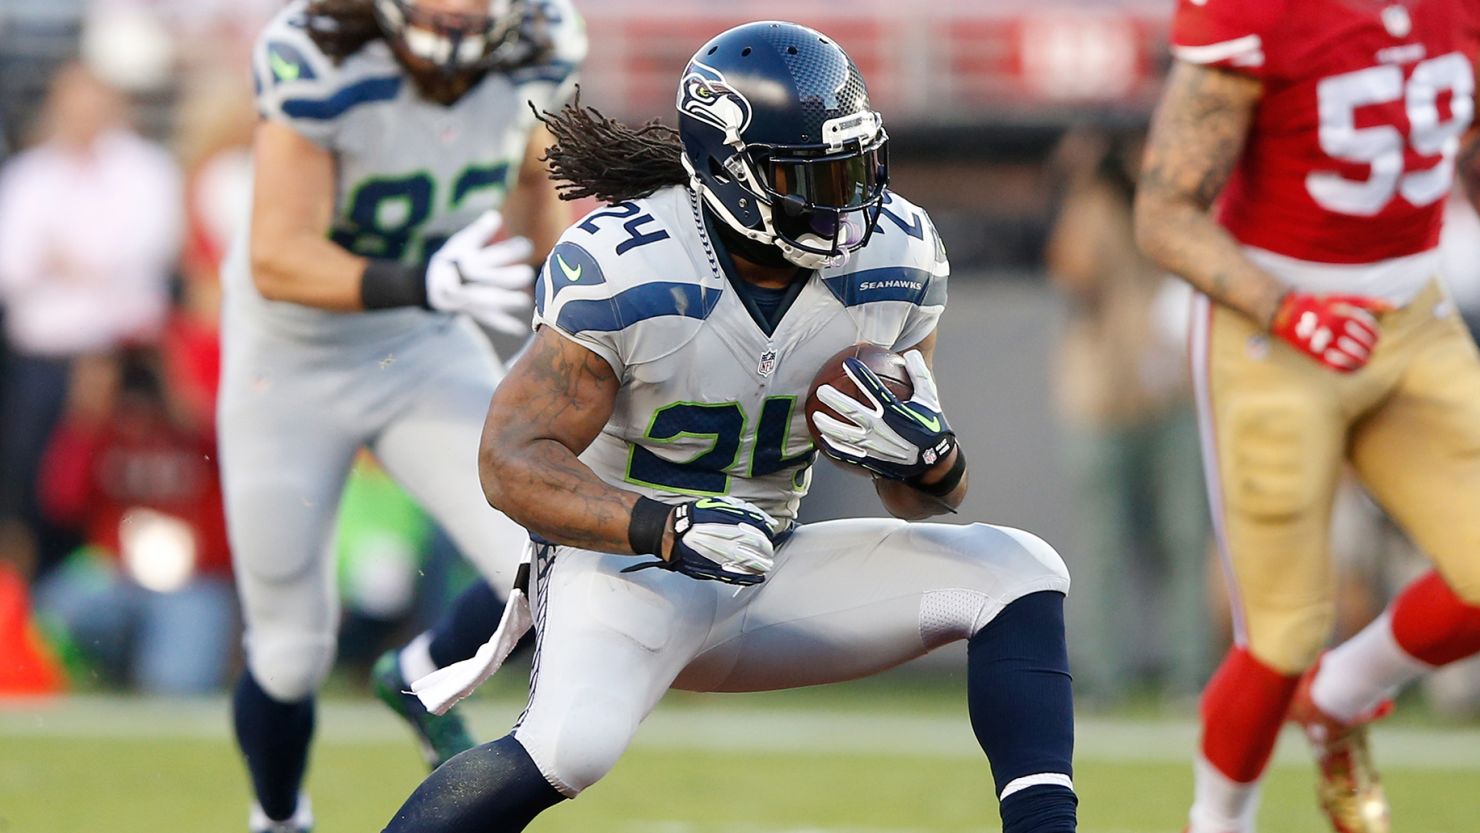 Marshawn Lynch is back with the Seattle Seahawks.